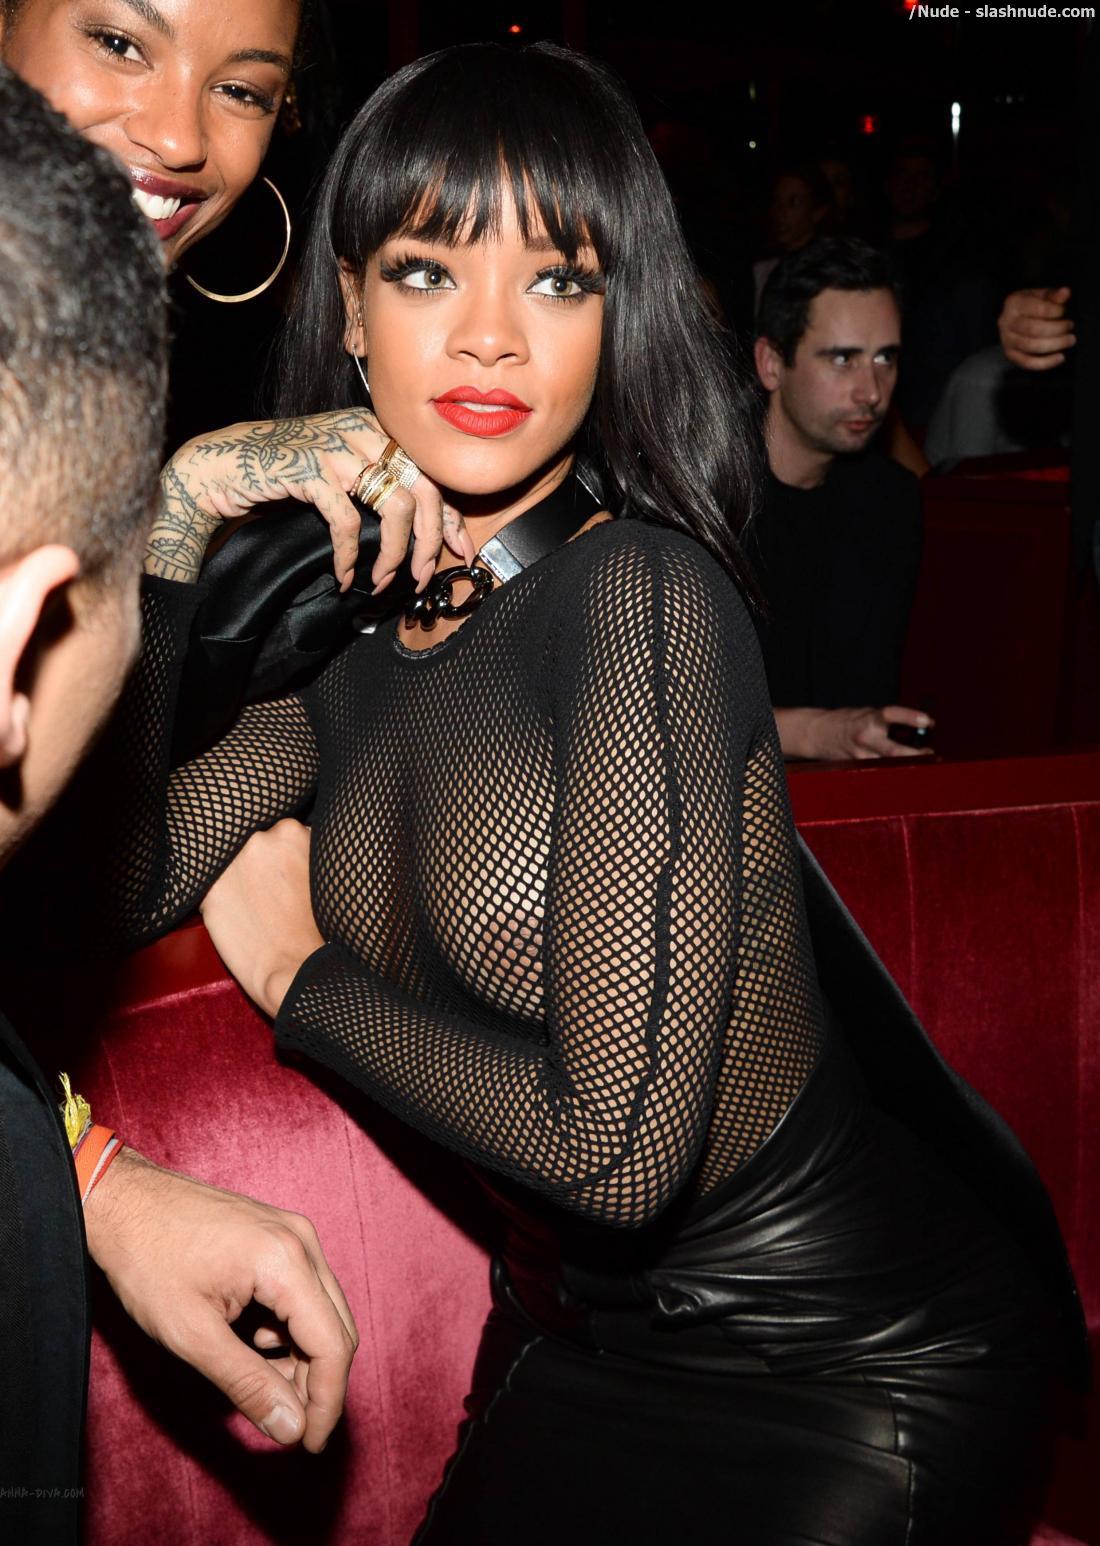 Rihanna Breasts In Totally See Through Mesh Top At Paris Party 3